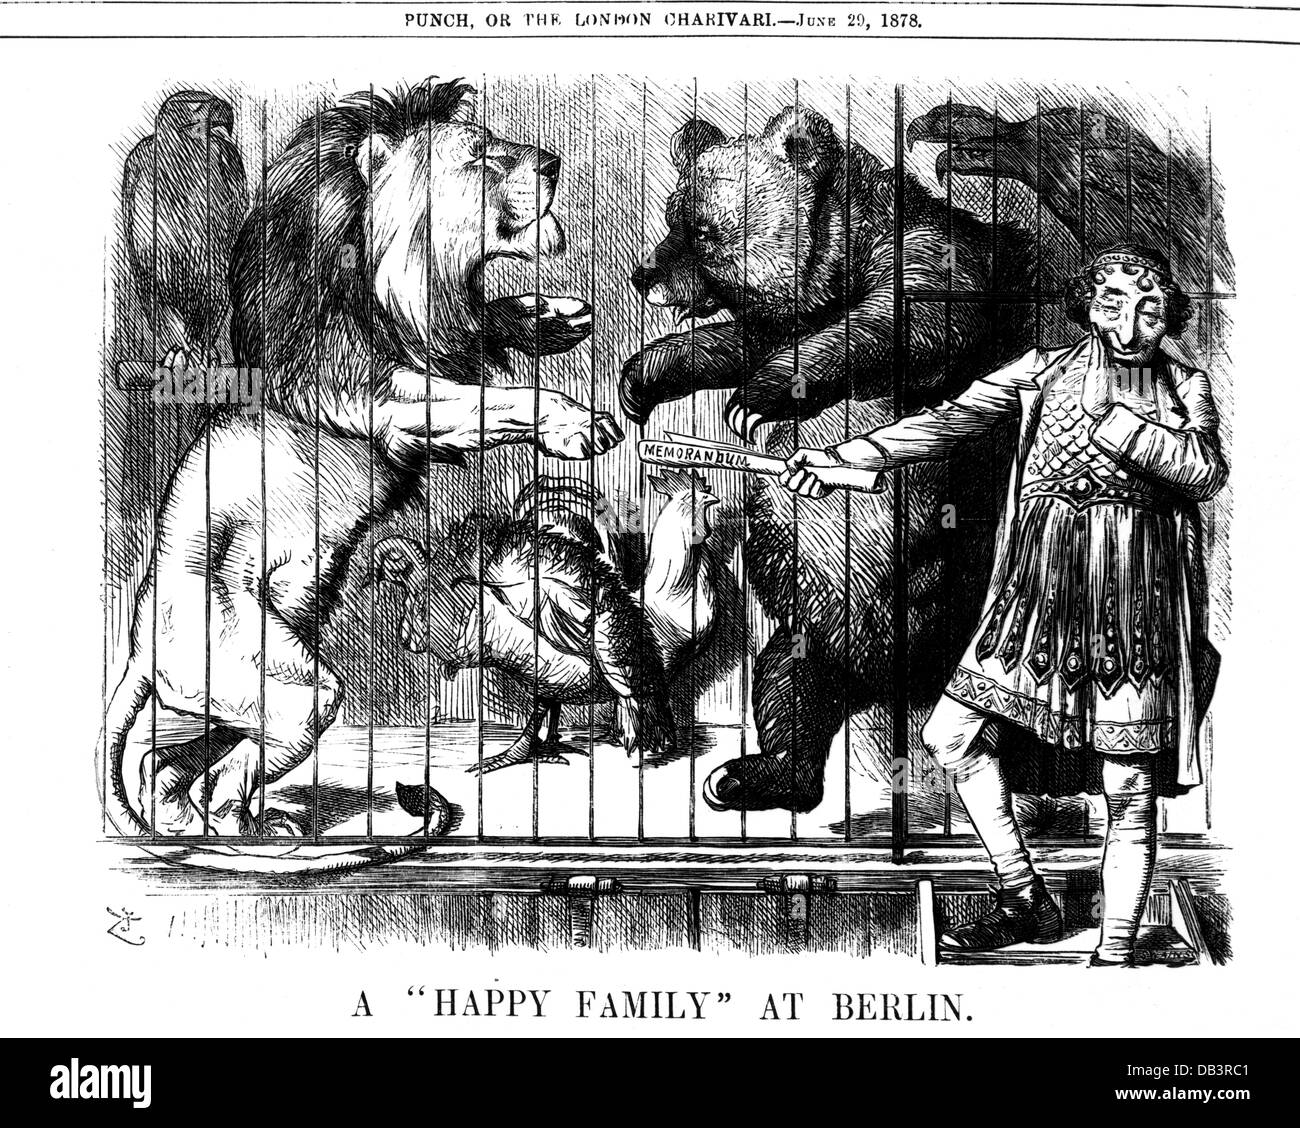 politics, conferences, Congress of Berlin 13.6. - 13.7.1878, British Prime Minister Benjamin Disraeli an a 'Happy Family', wood engraving, 'Punch', London, 29.6.1878, Additional-Rights-Clearences-Not Available Stock Photo